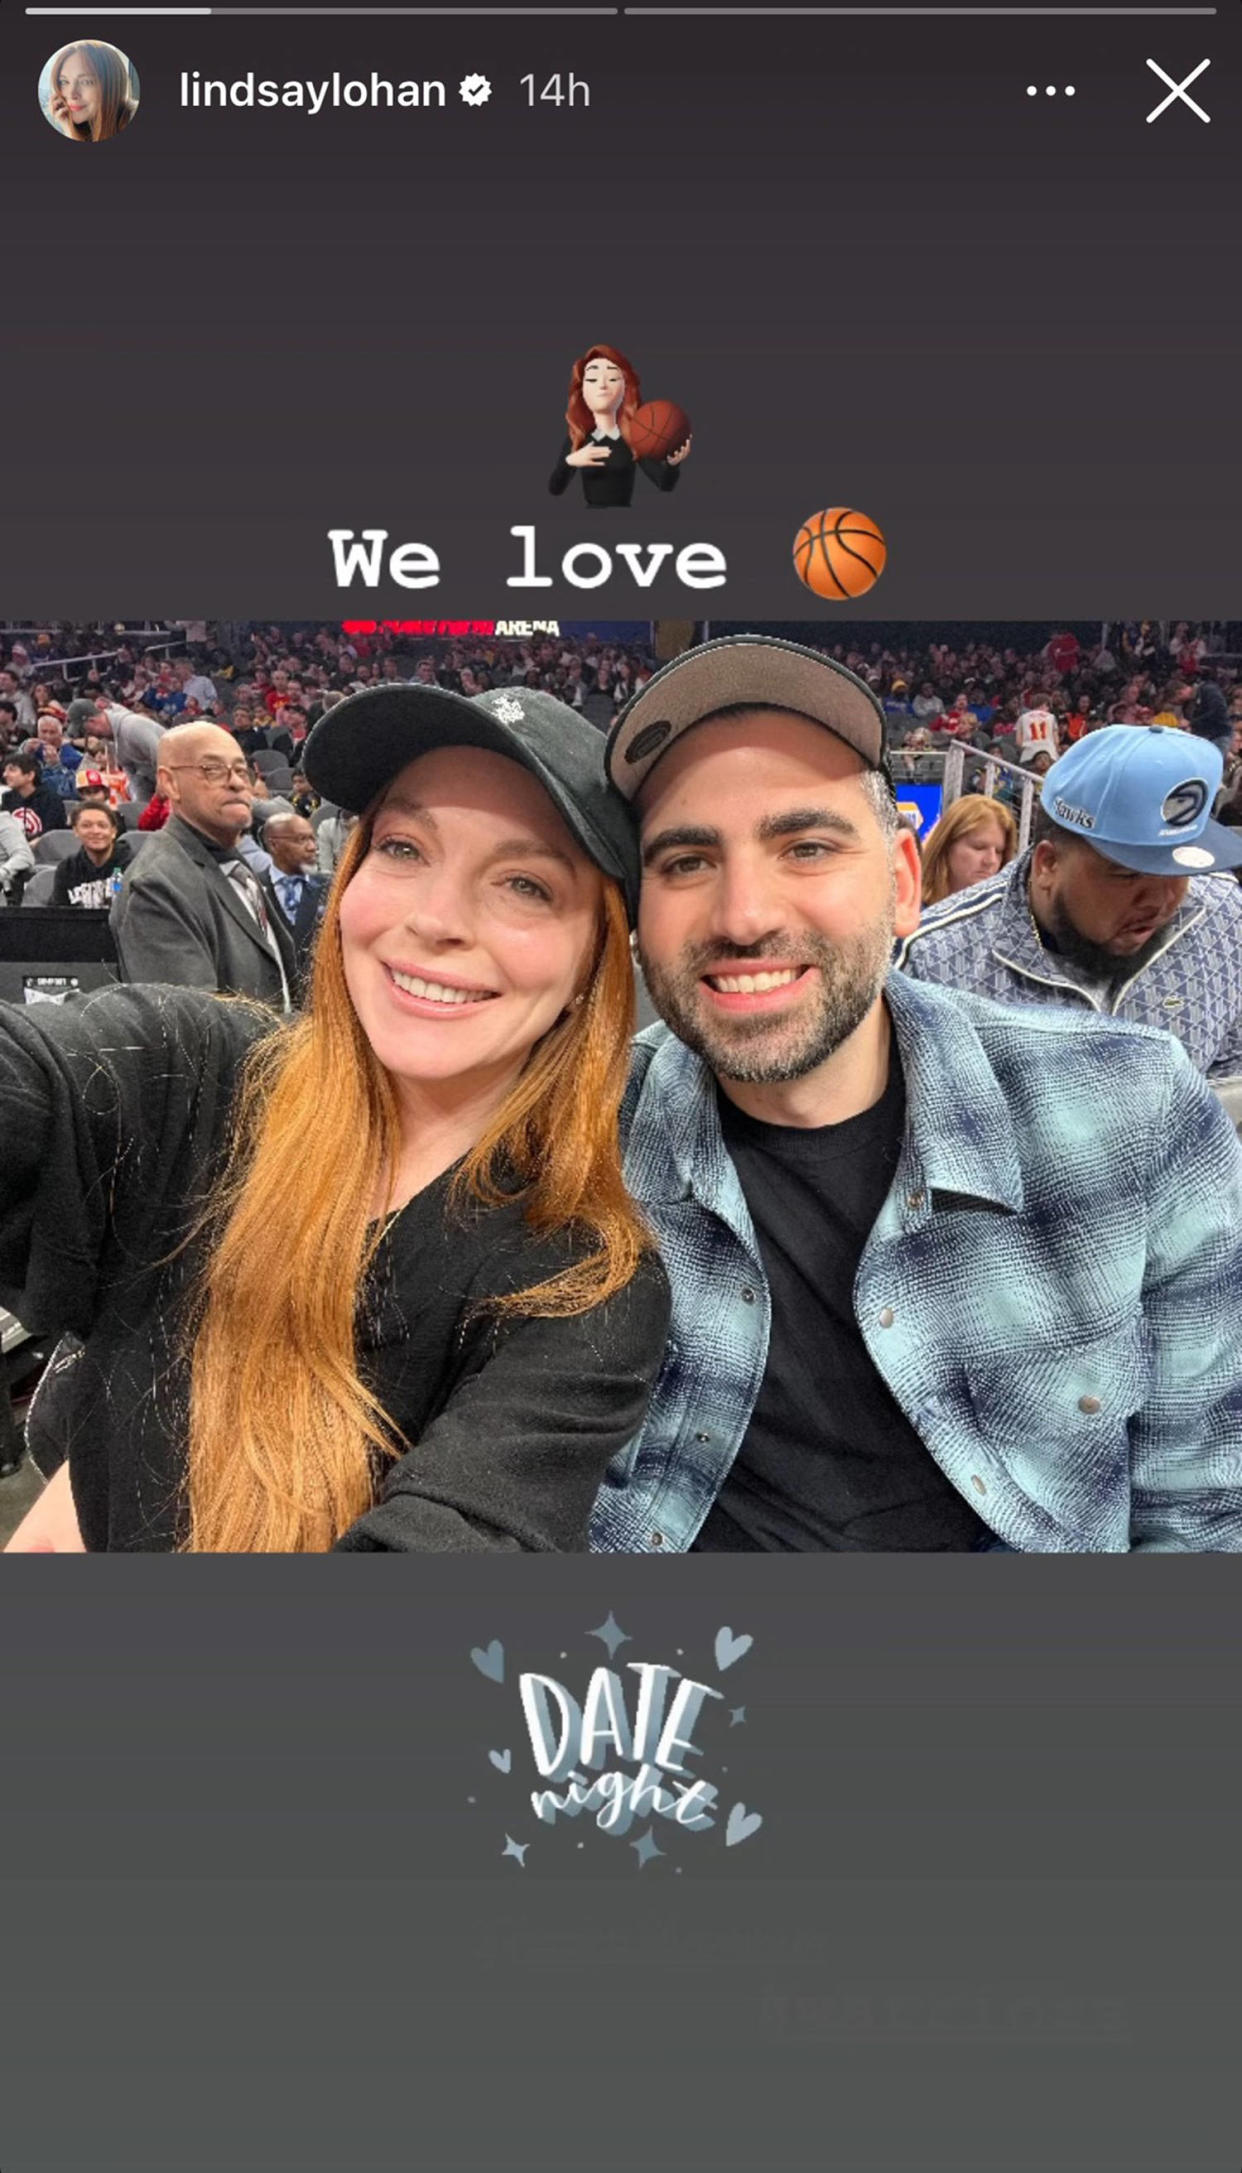 Lindsay Lohan and Bader Shammas were all smiles at the Golden State Warriors game. (Lindsay Lohan / Instagram)